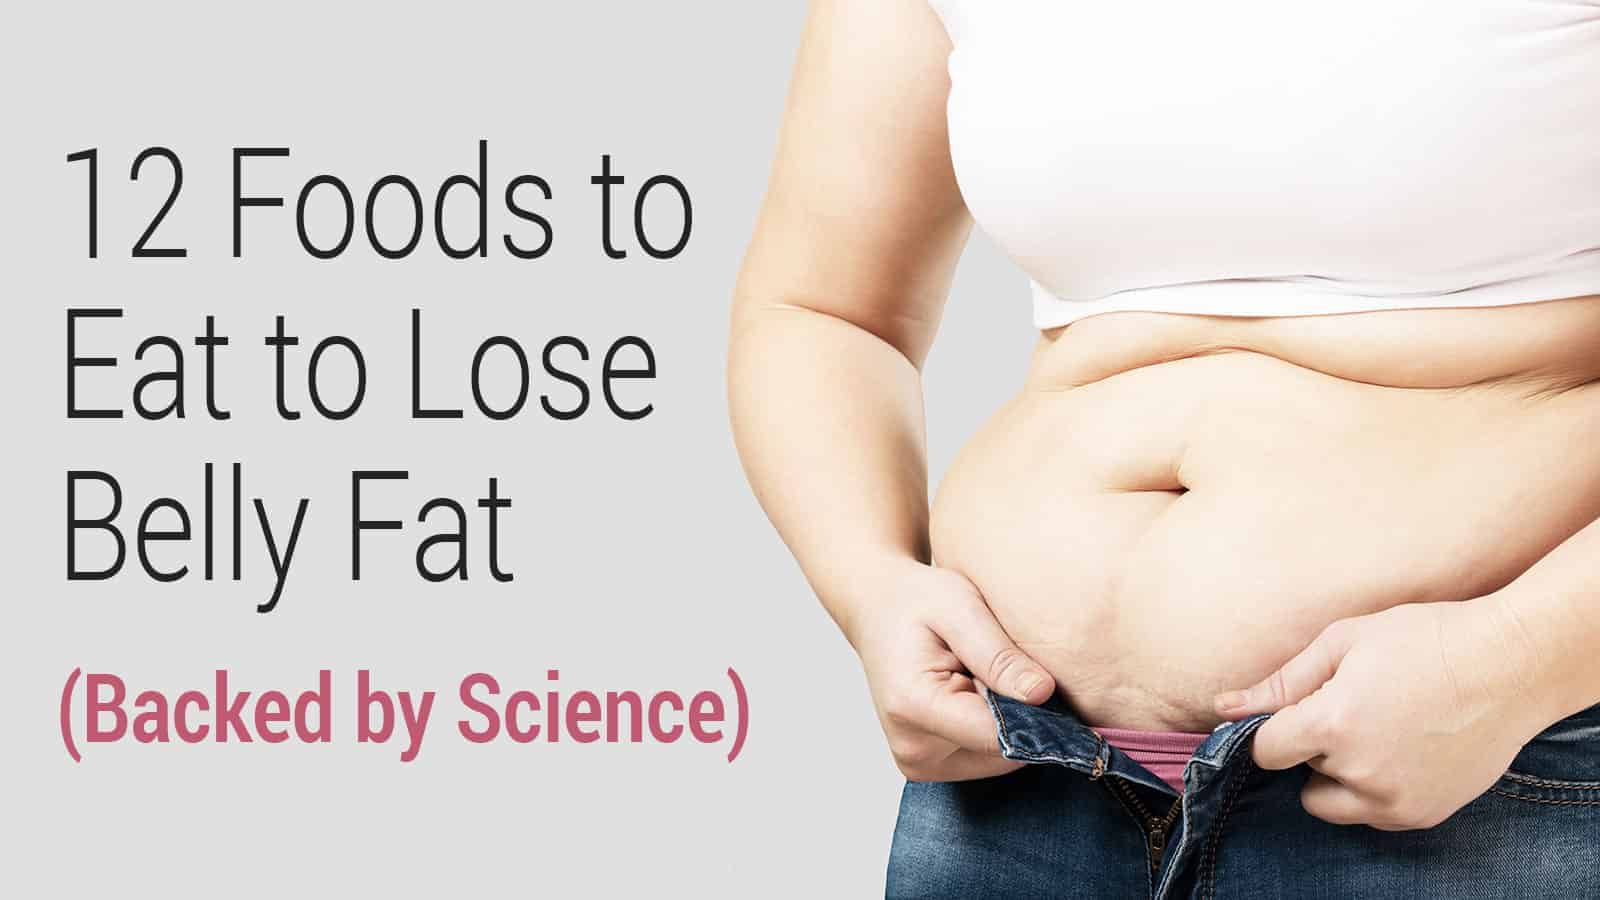 12 Foods to Eat to Lose Belly Fat (Backed by Science)